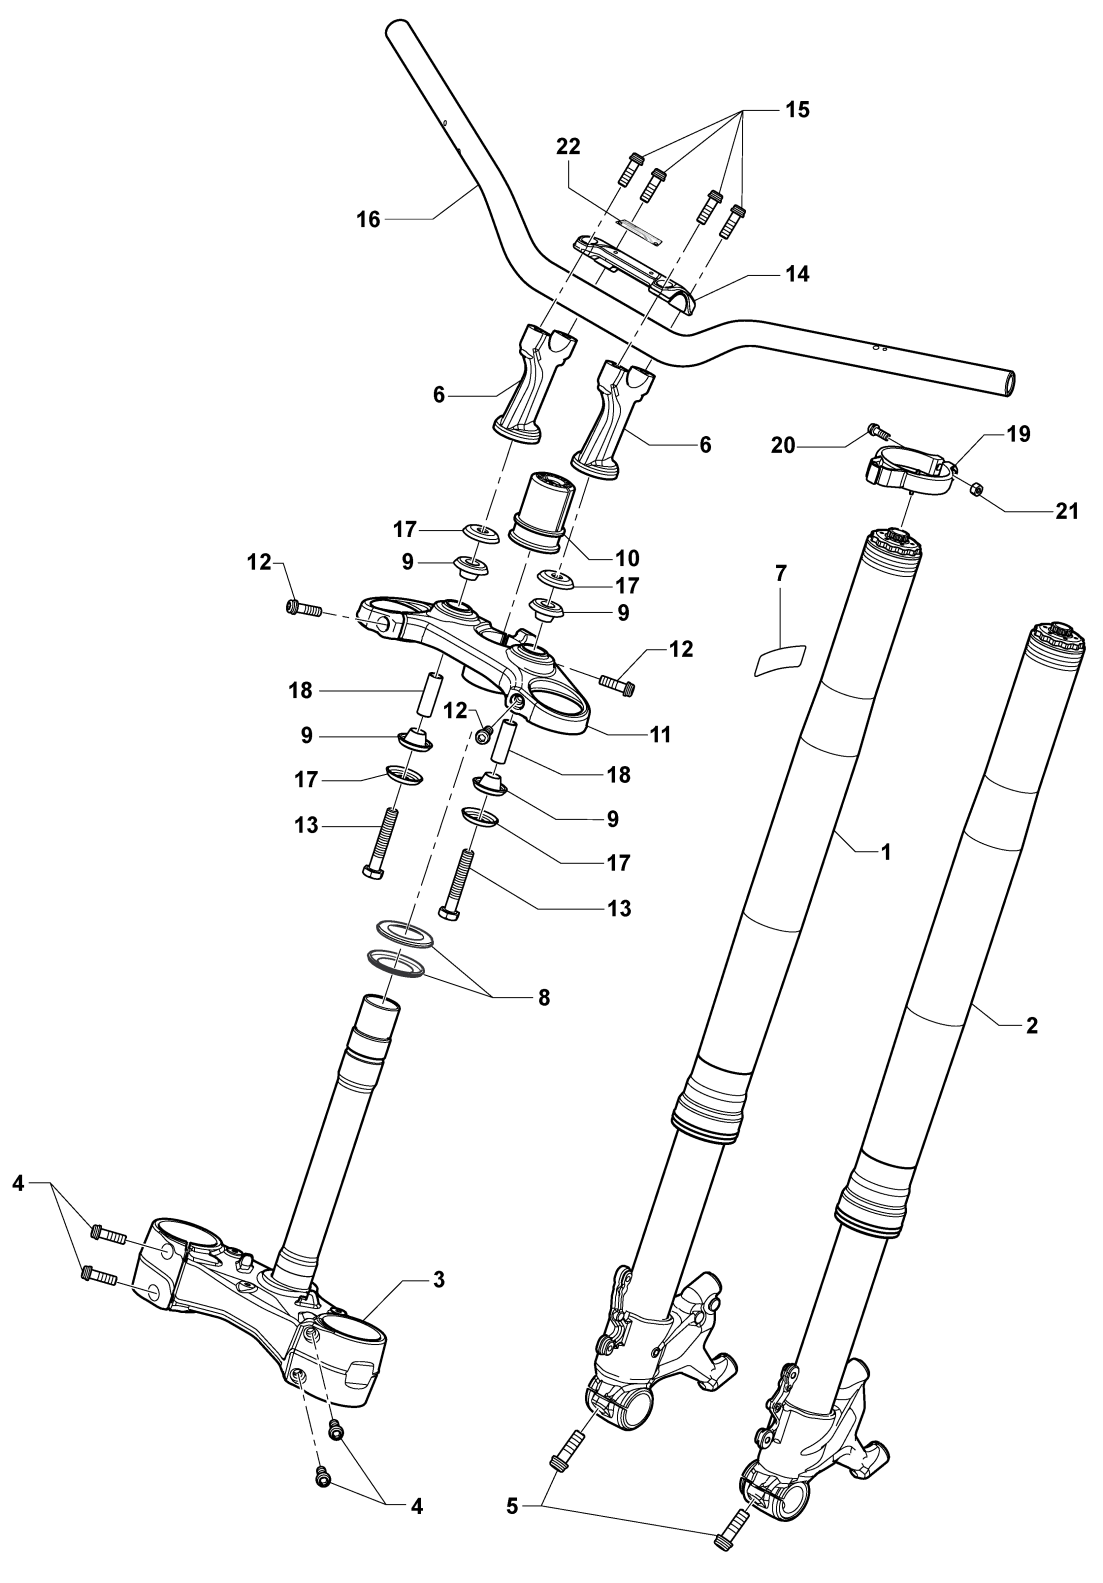 Front Suspension Assembly


